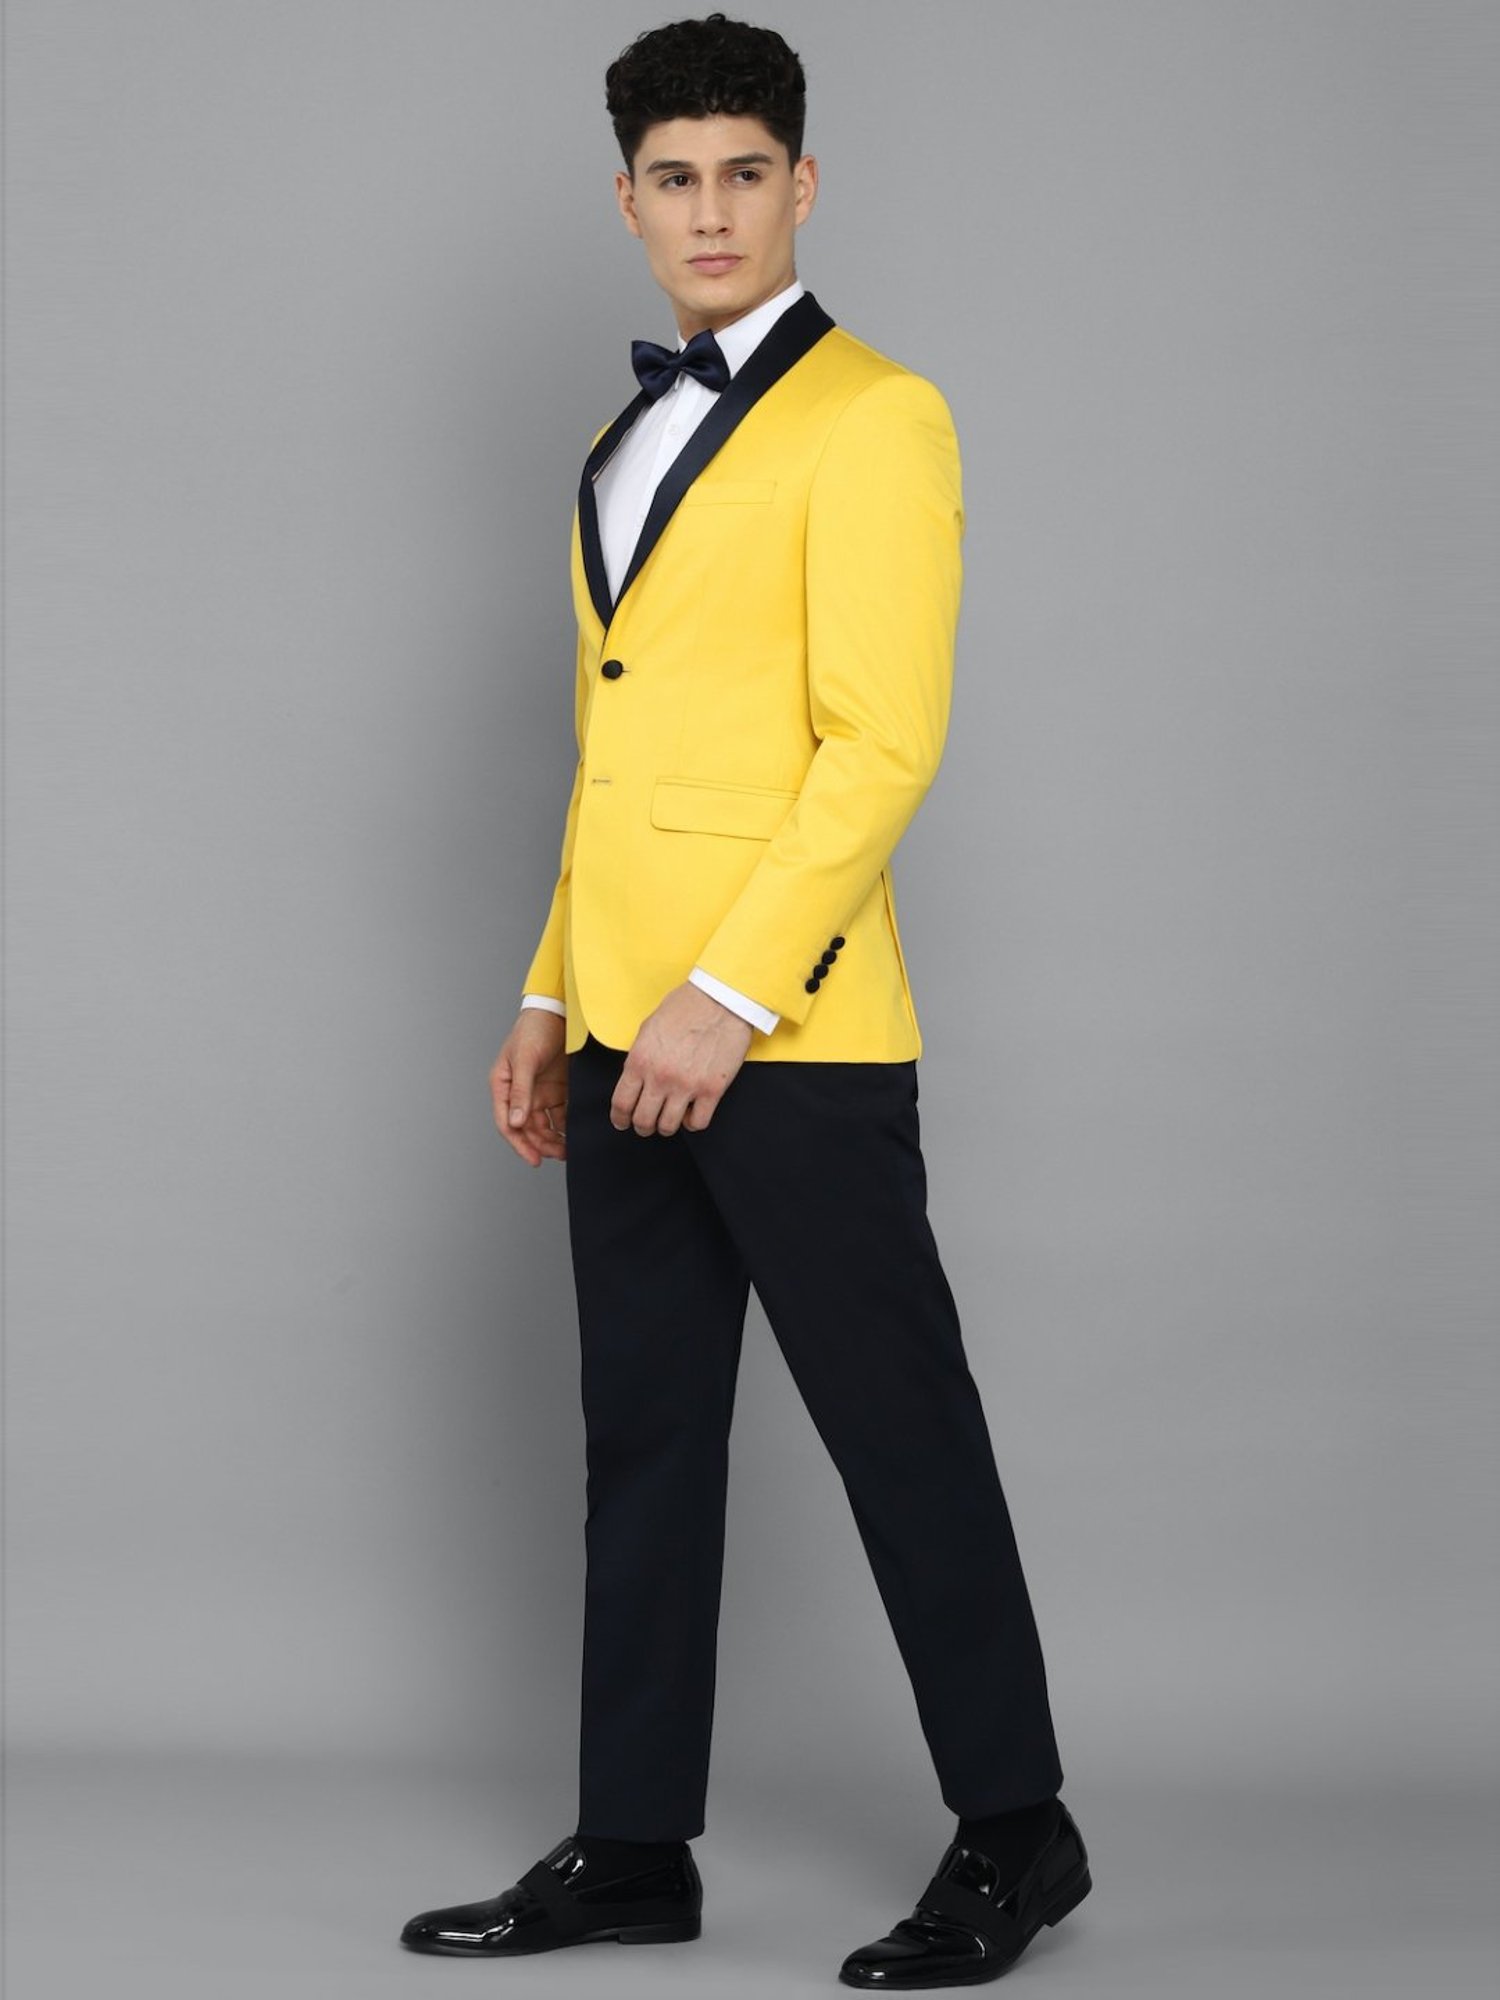 Top 187+ black and yellow suit latest